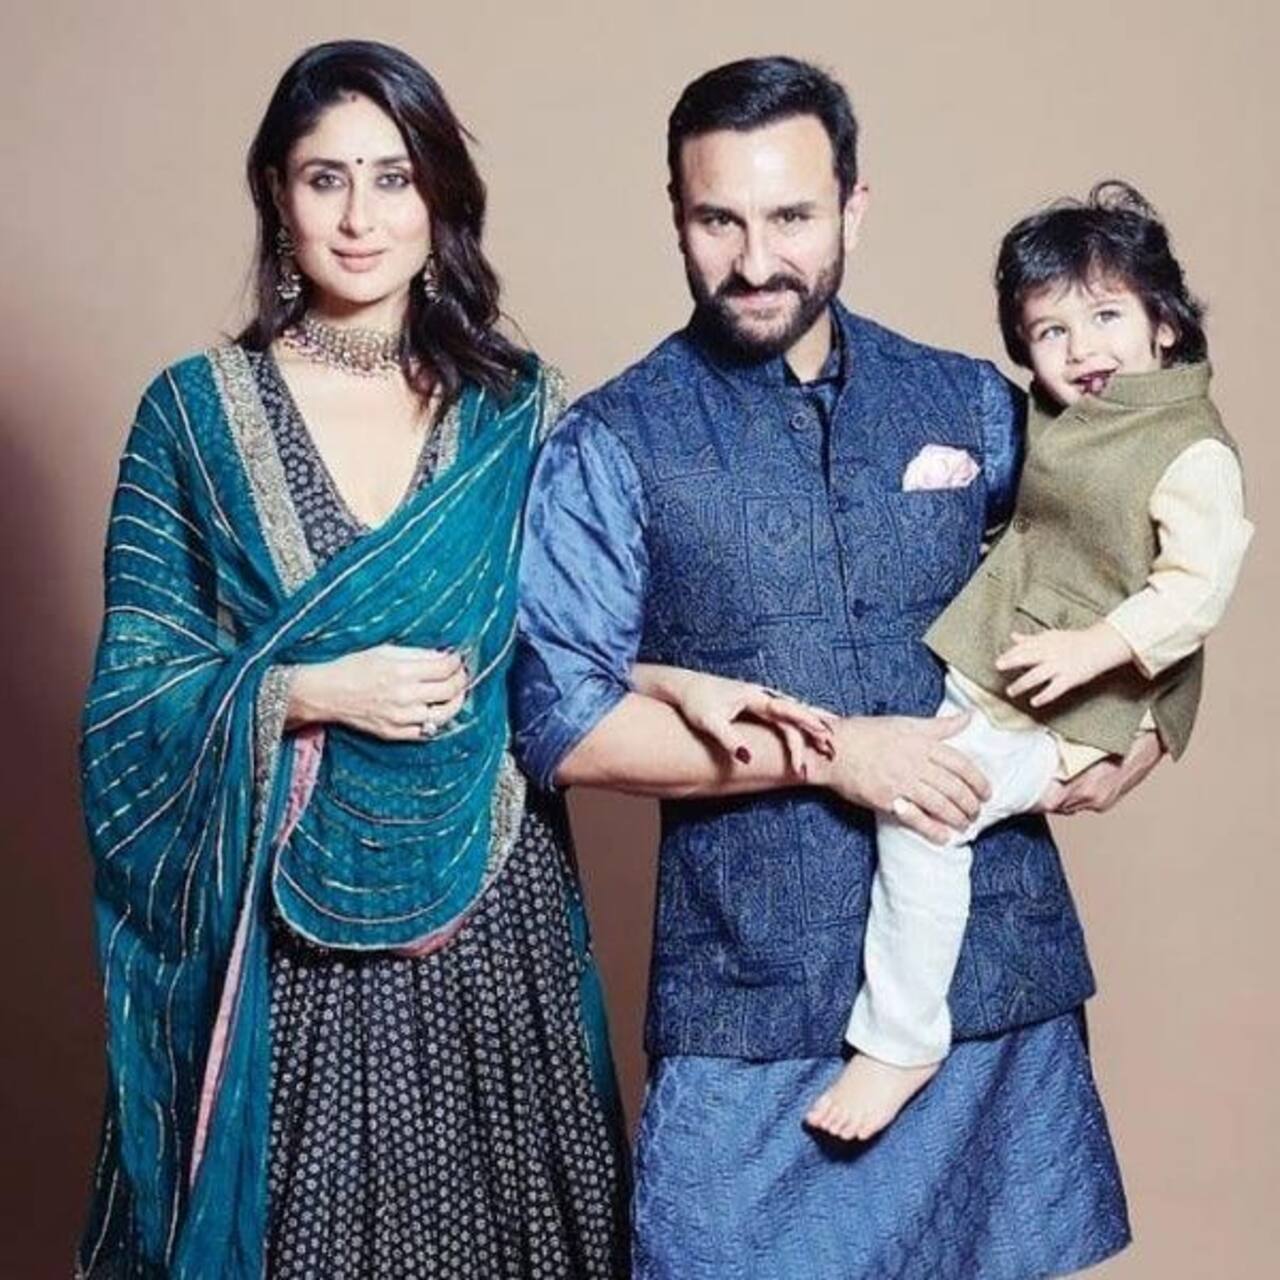 Coronavirus pandemic: Kareena Kapoor Khan and Saif Ali Khan pledge to support UNICEF, GIVE INDIA, and IAHV in the fight against the deadly virus